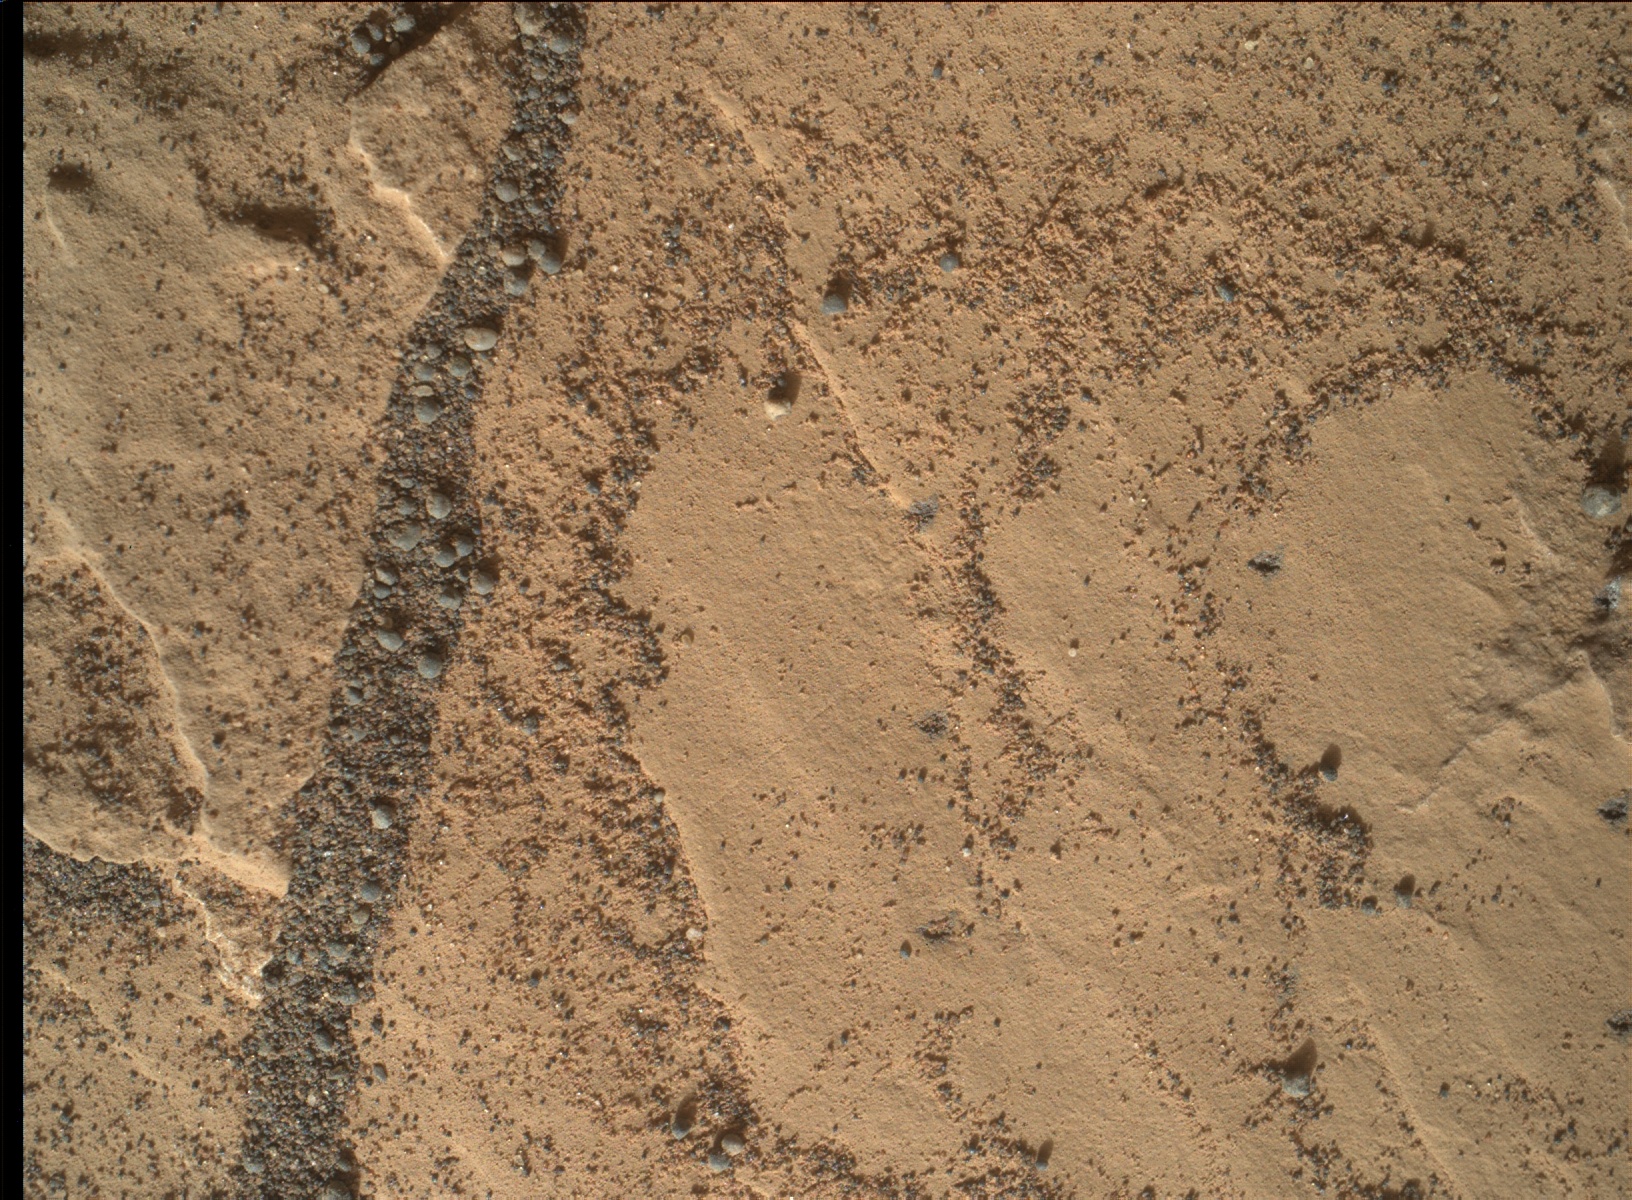 Nasa's Mars rover Curiosity acquired this image using its Mars Hand Lens Imager (MAHLI) on Sol 1715